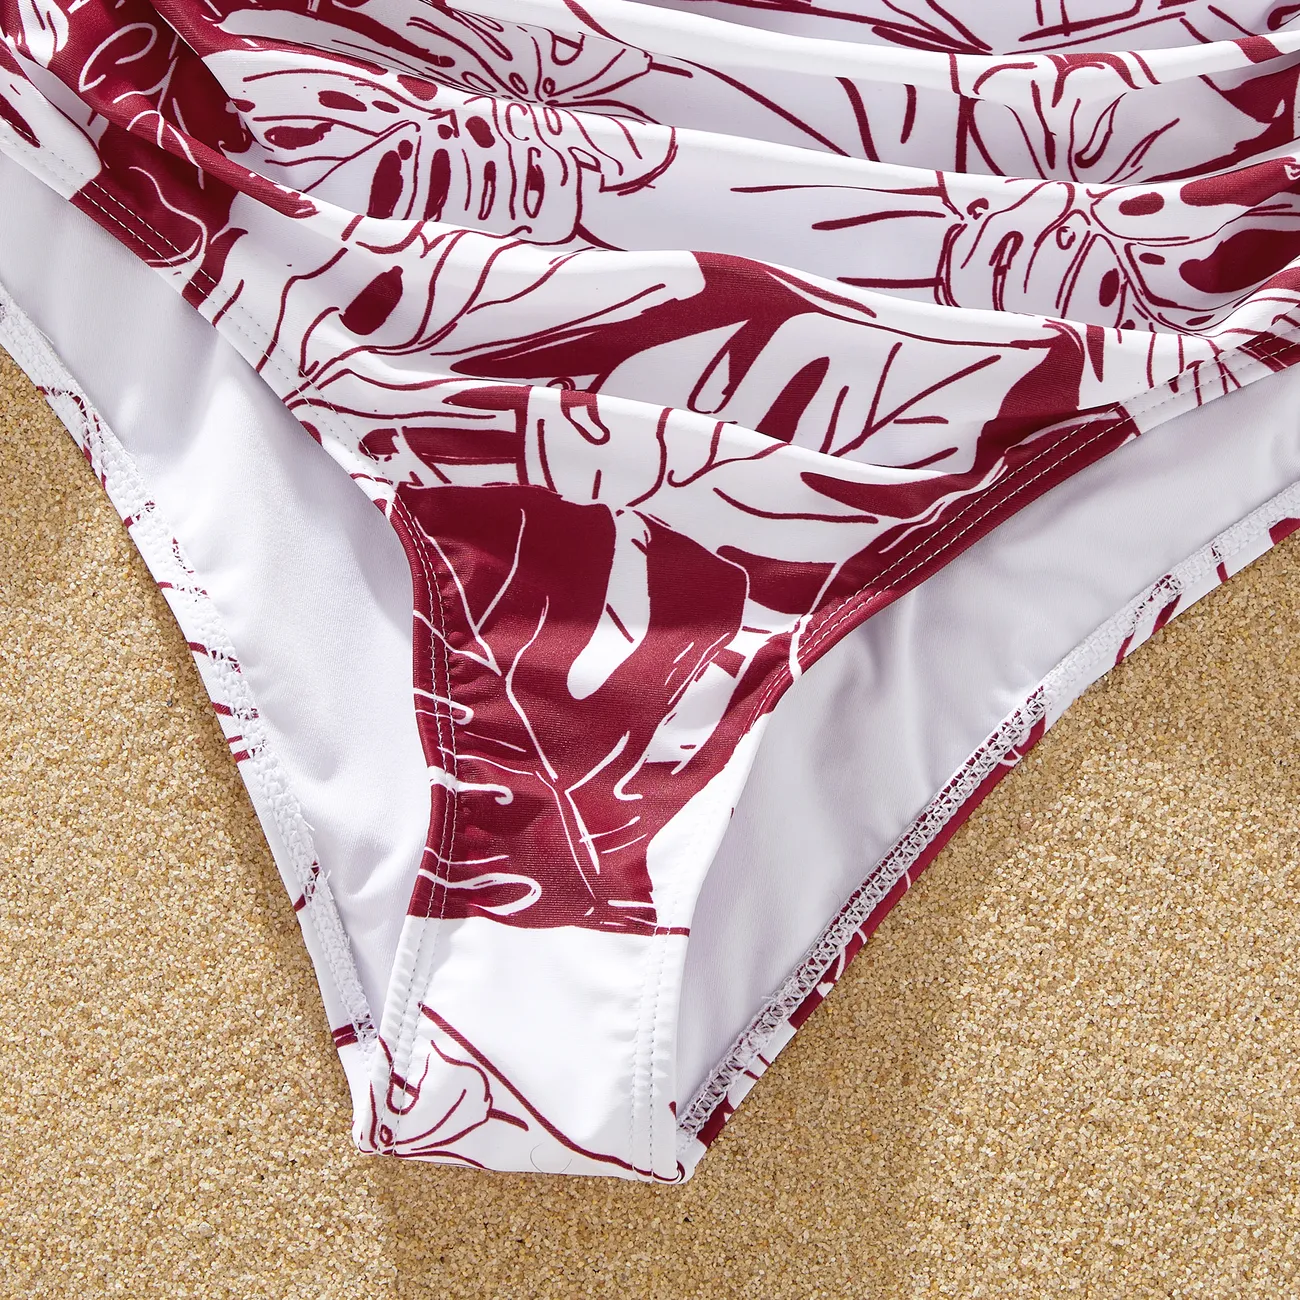 Family Matching Floral Drawstring Swim Trunks or One-Piece Belted Strap Swimsuit MAROON big image 1